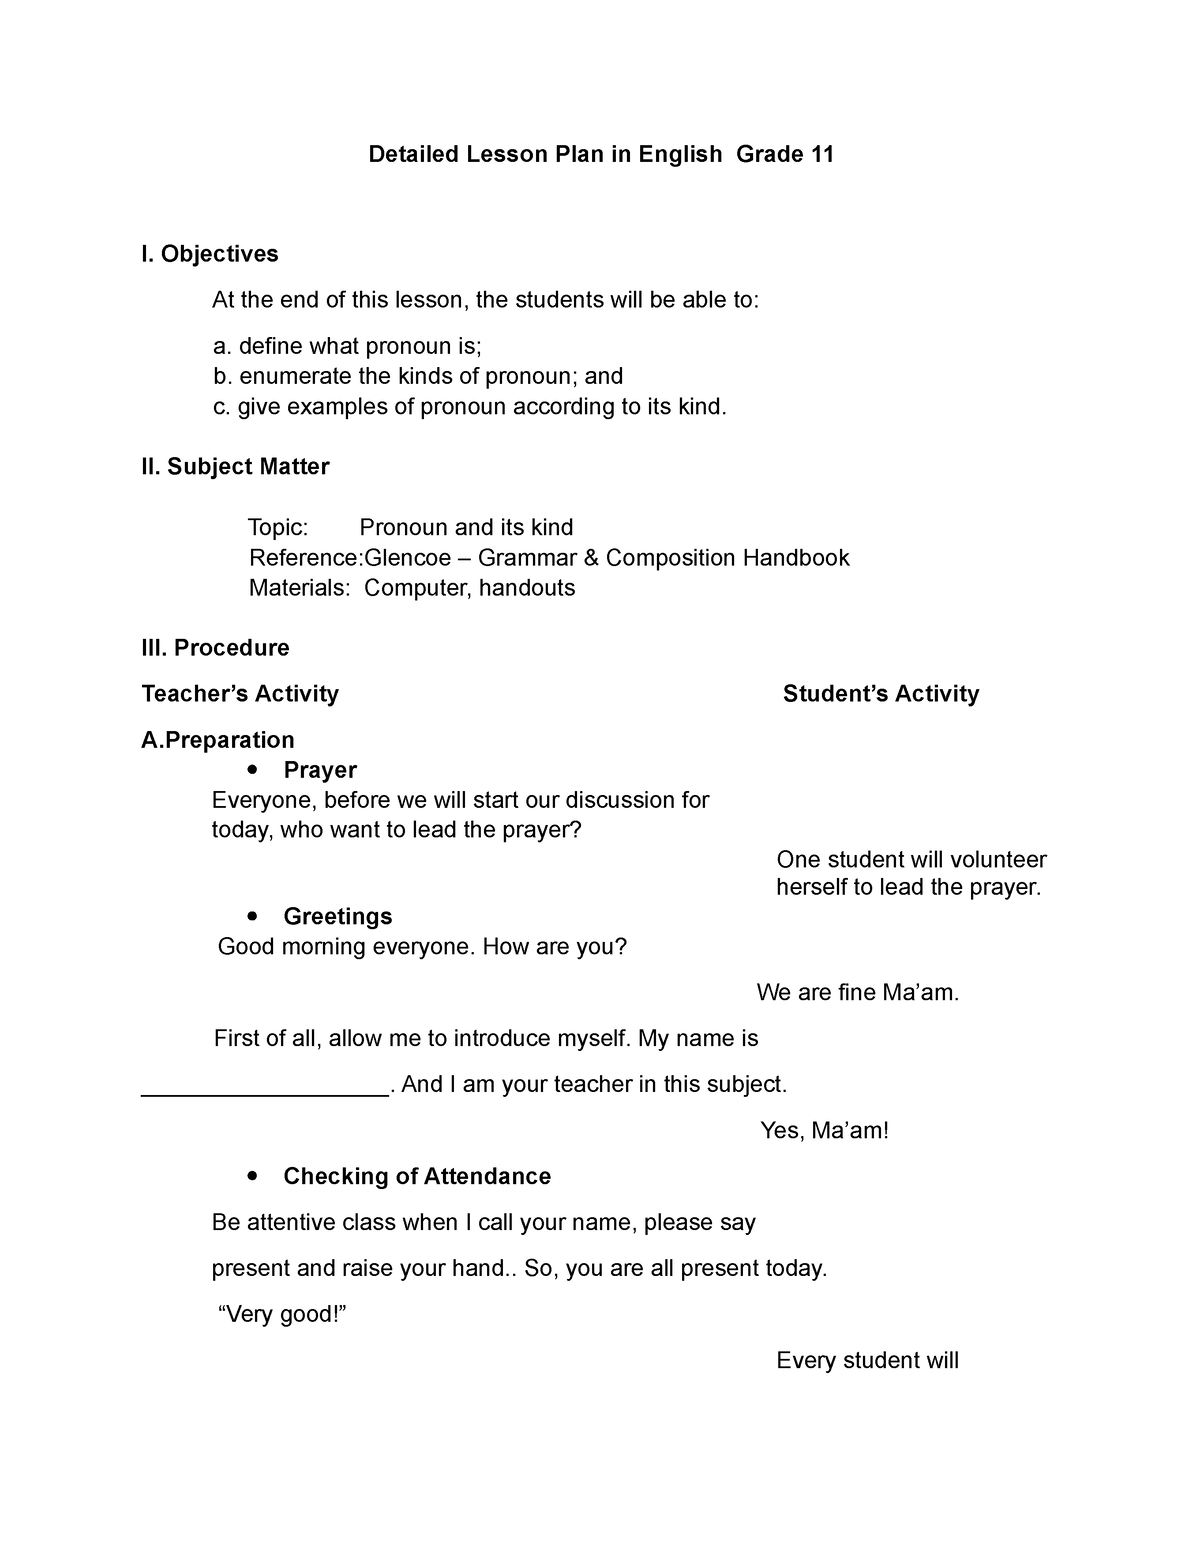 detailed-lp-pronoun-and-its-kind-1-copy-detailed-lesson-plan-in